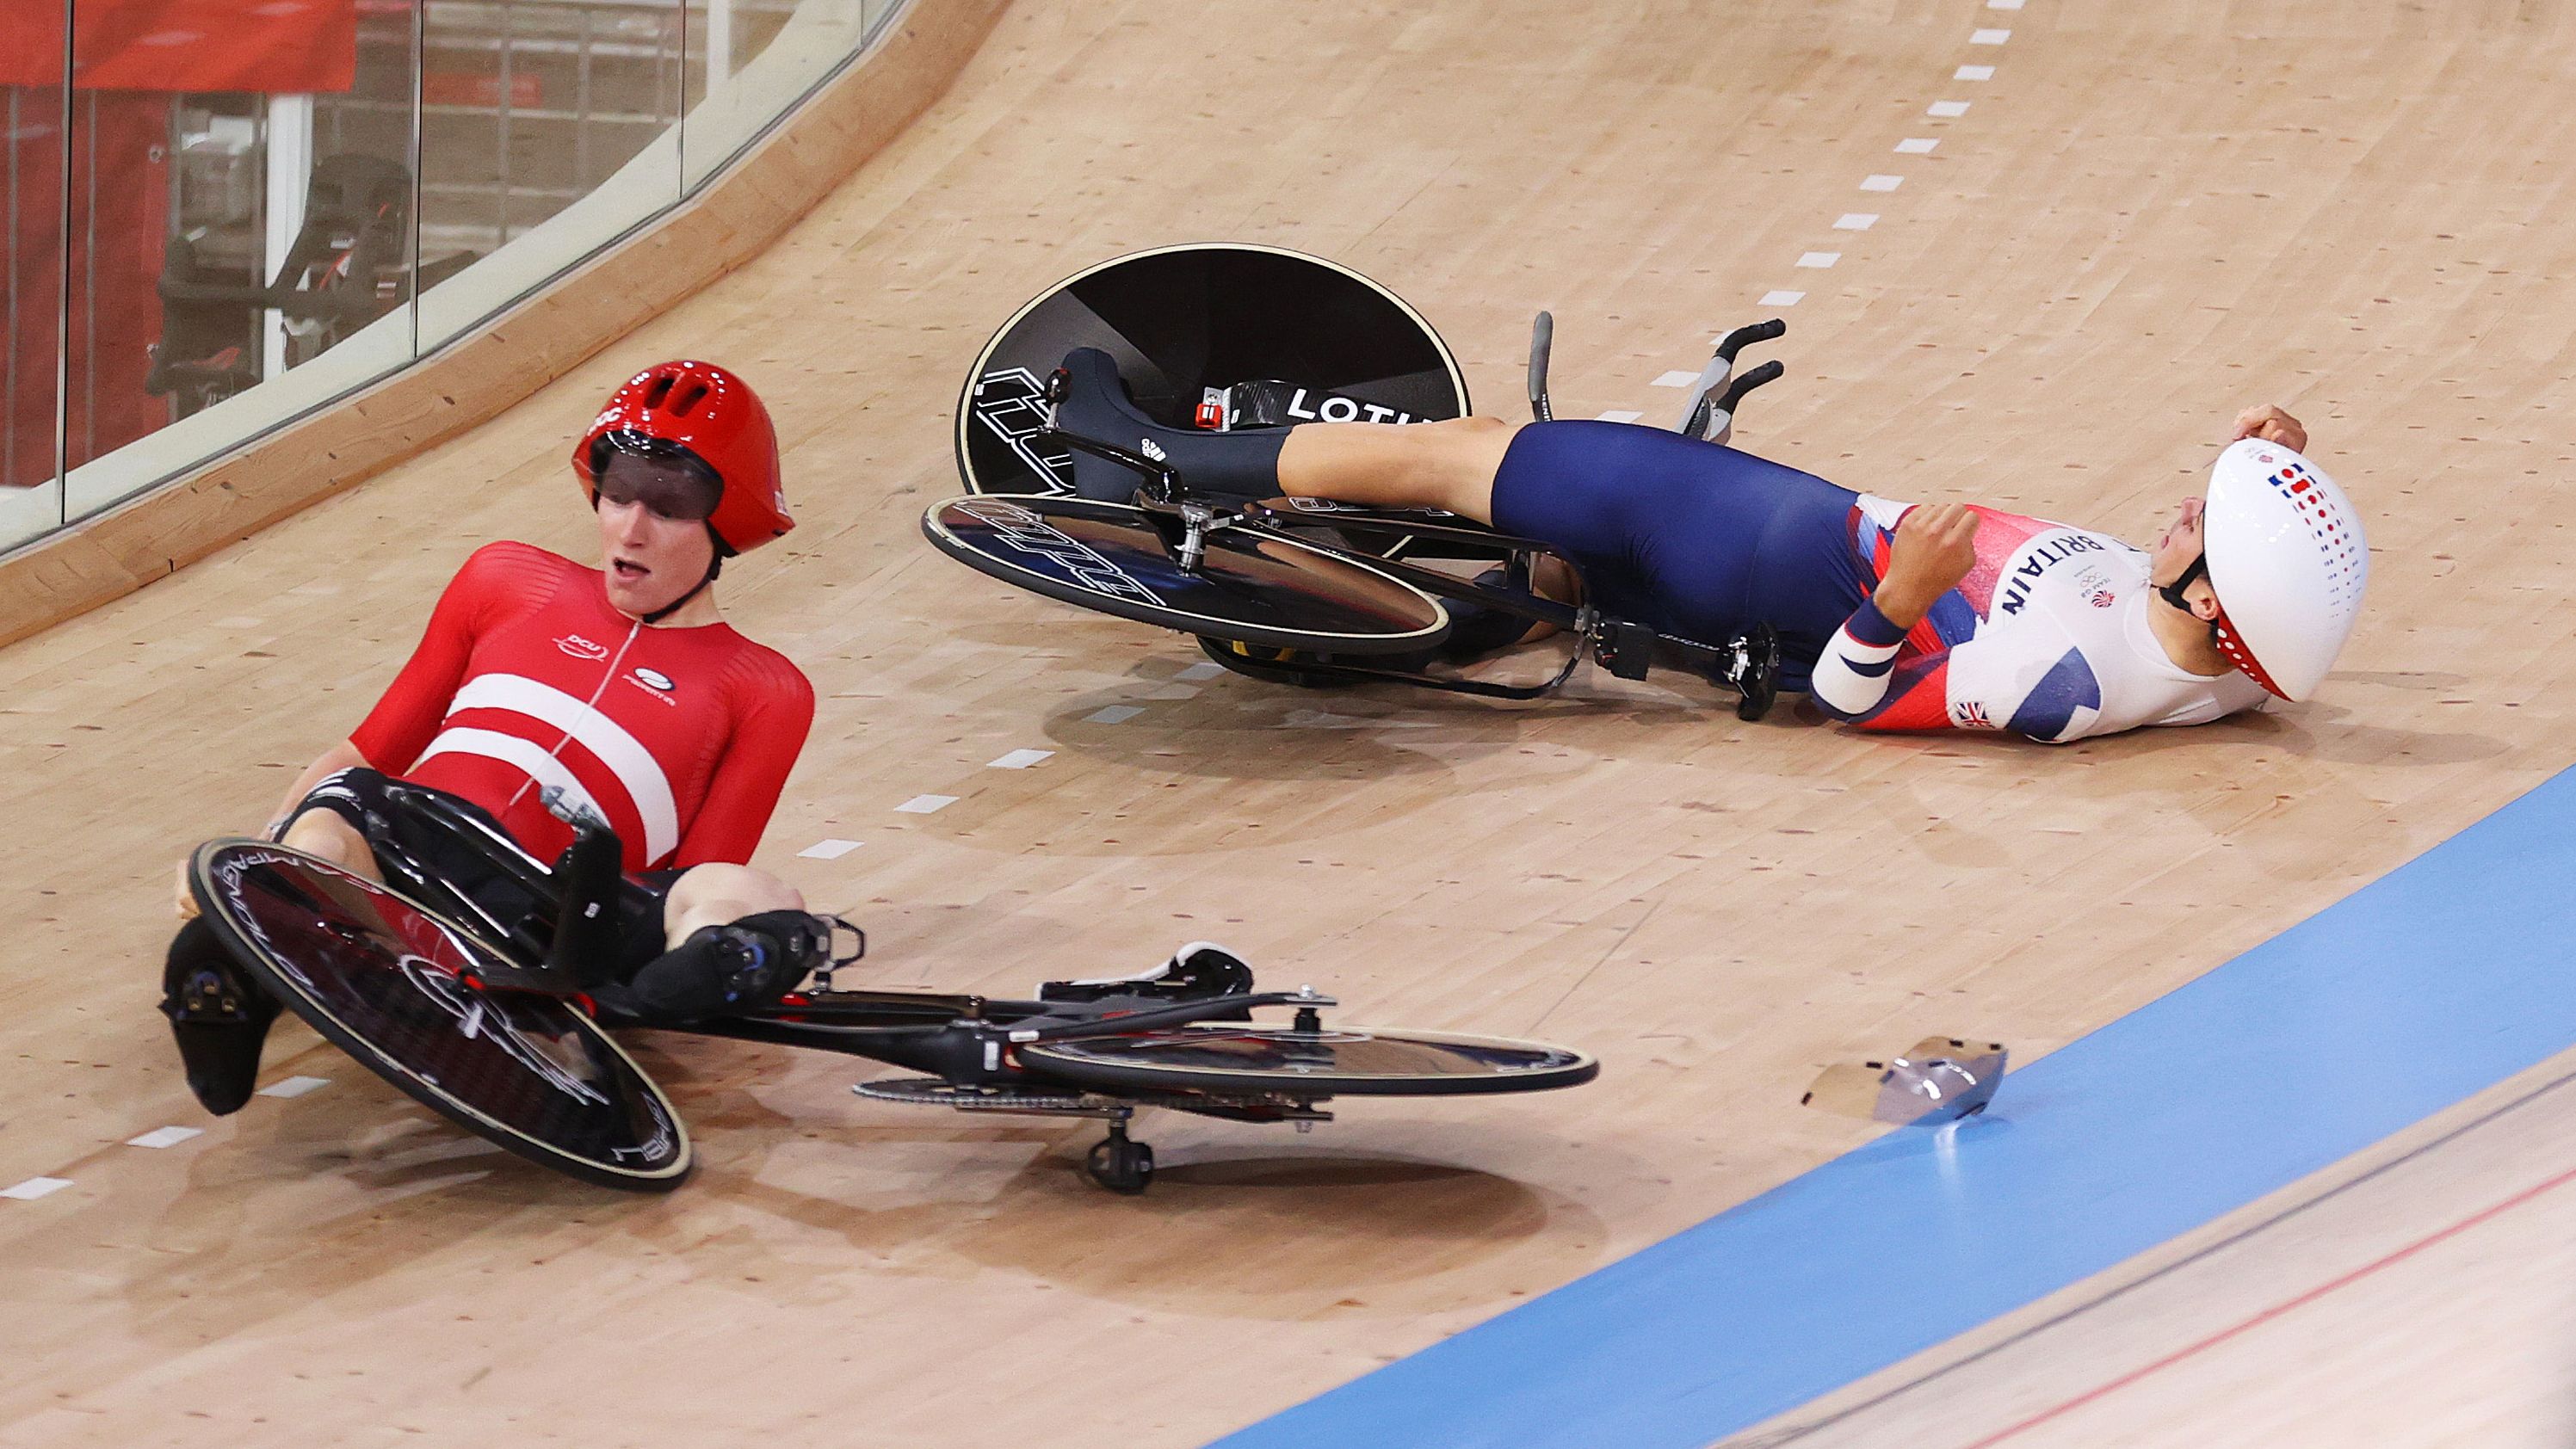 Frederik Madsen of Team Denmark and Charlie Tanfield of Team Great Britain on the ground after the fall.